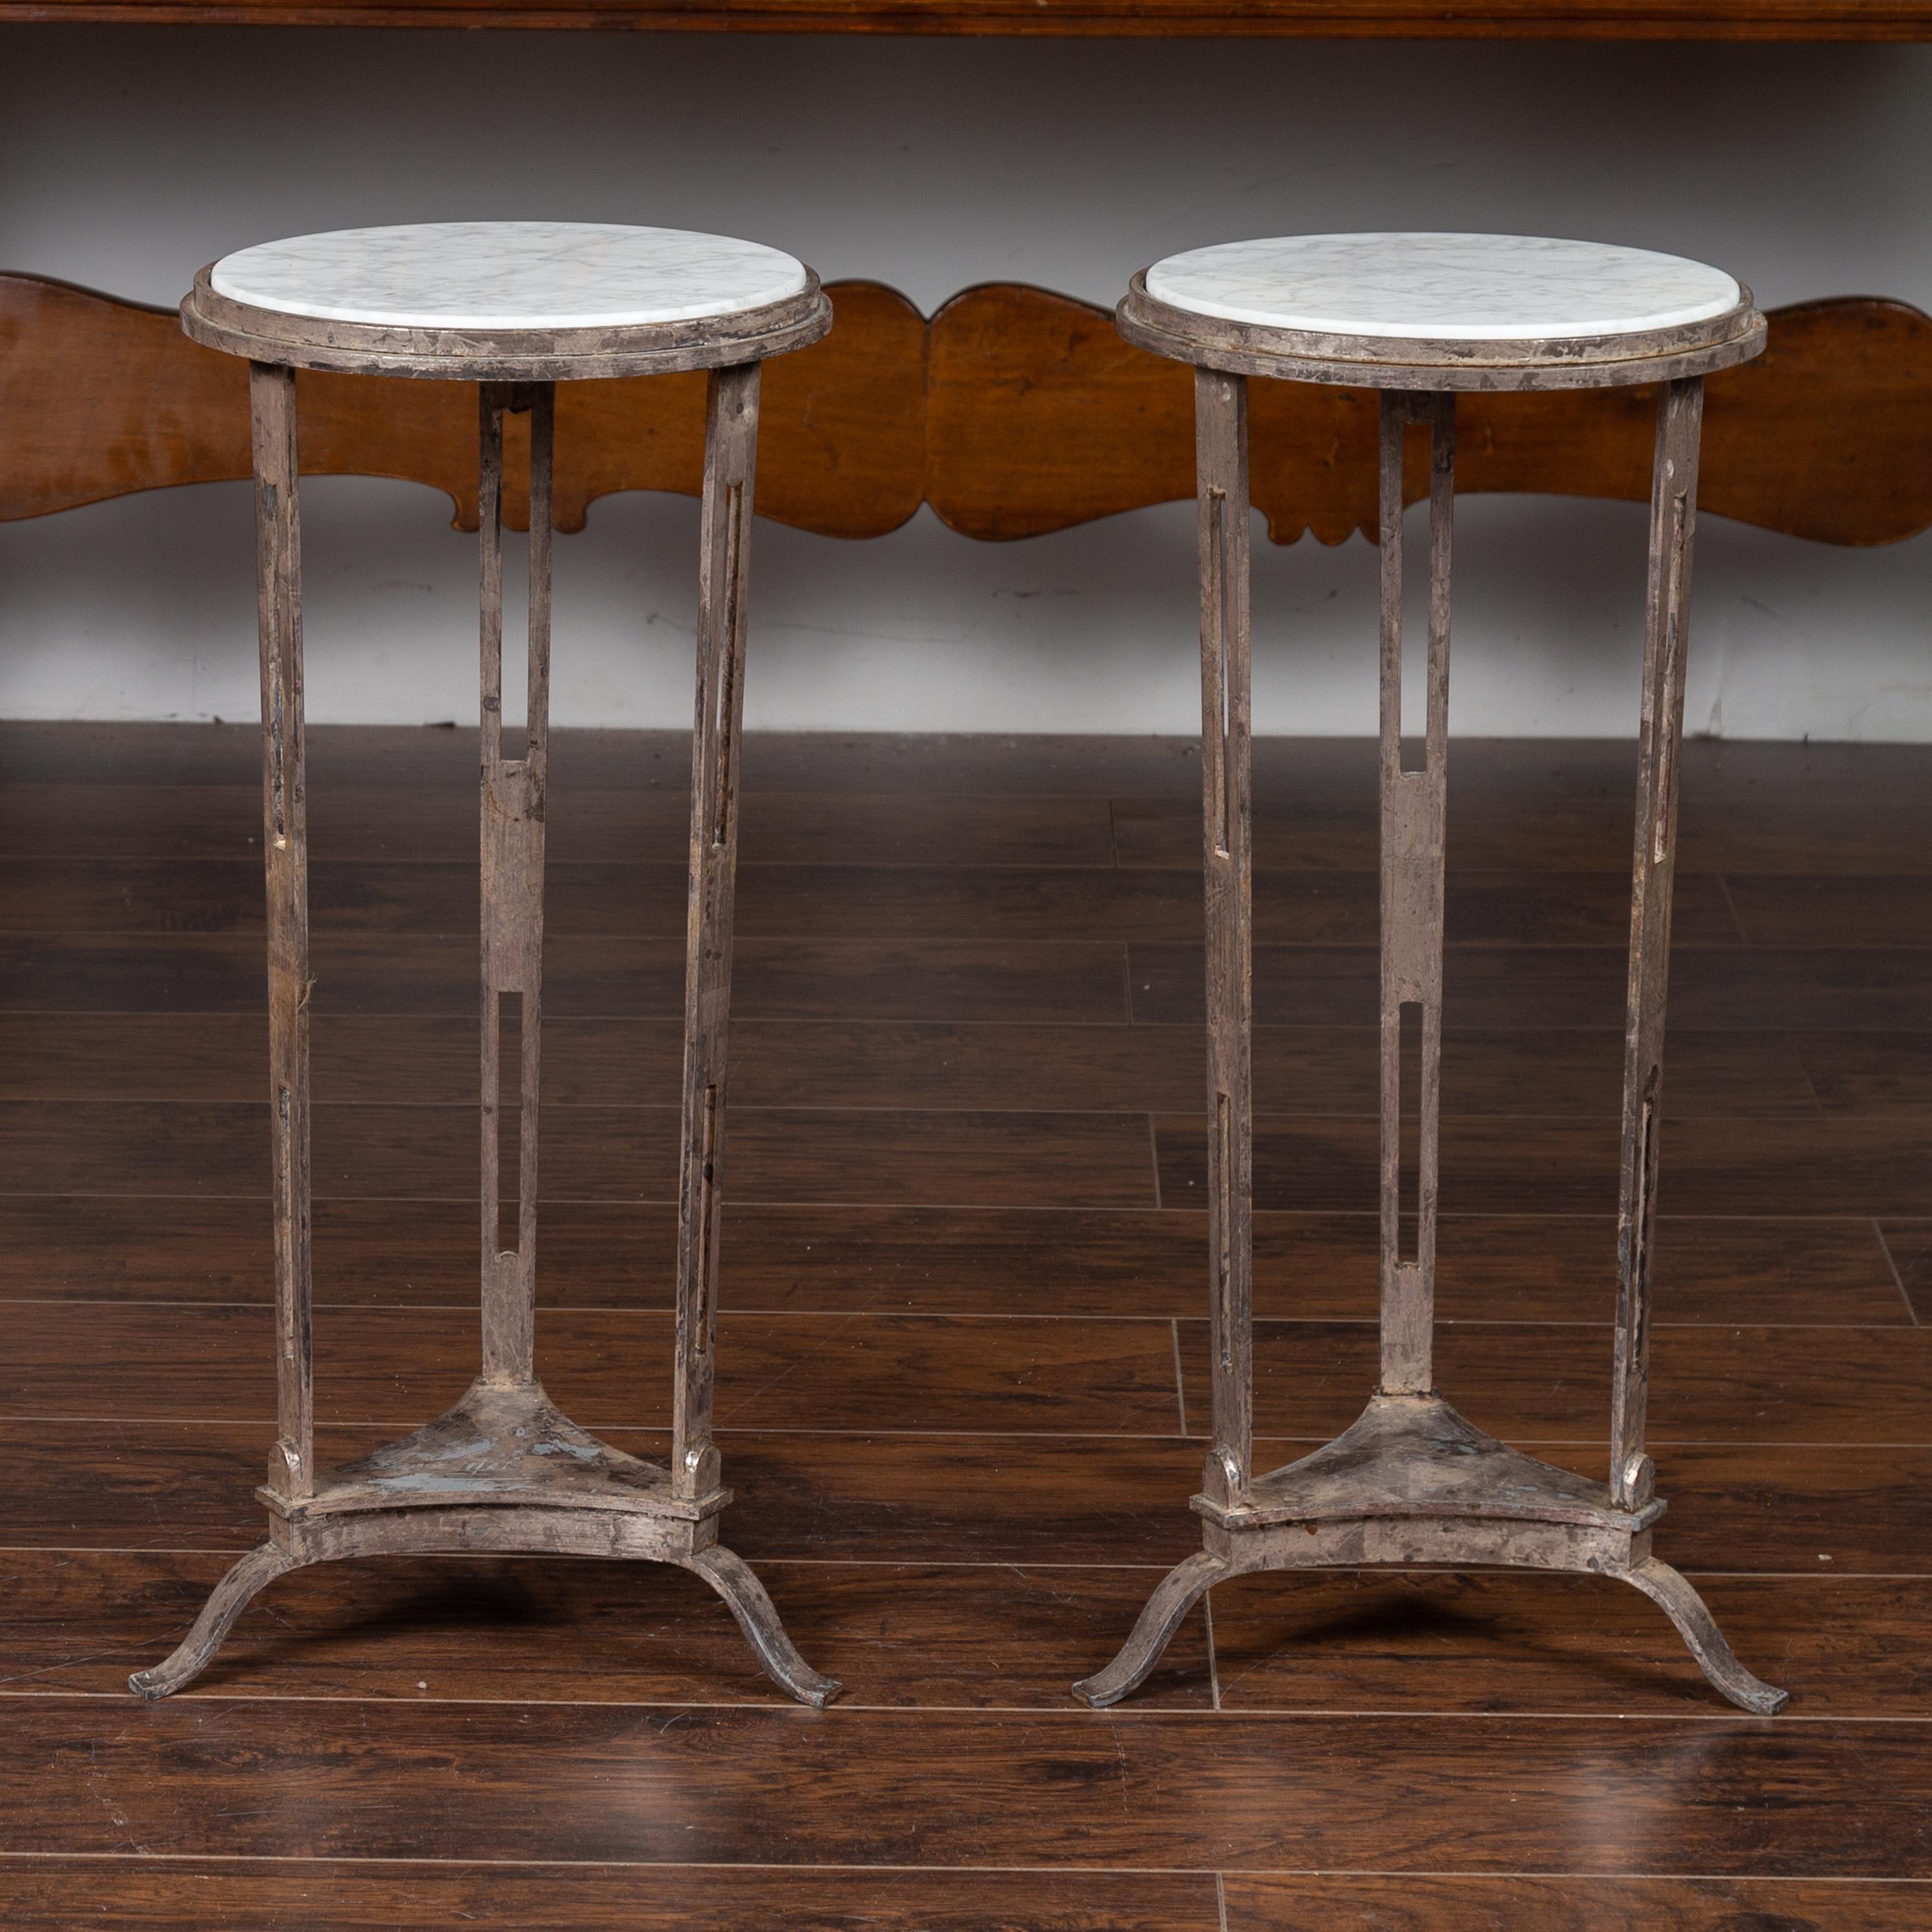 A pair of Italian vintage silver leaf drinks tables from the mid-20th century, with white veined marble tops. Born in Italy during the midcentury period, each of this pair of drinks tables features a circular white marble top resting on a silver